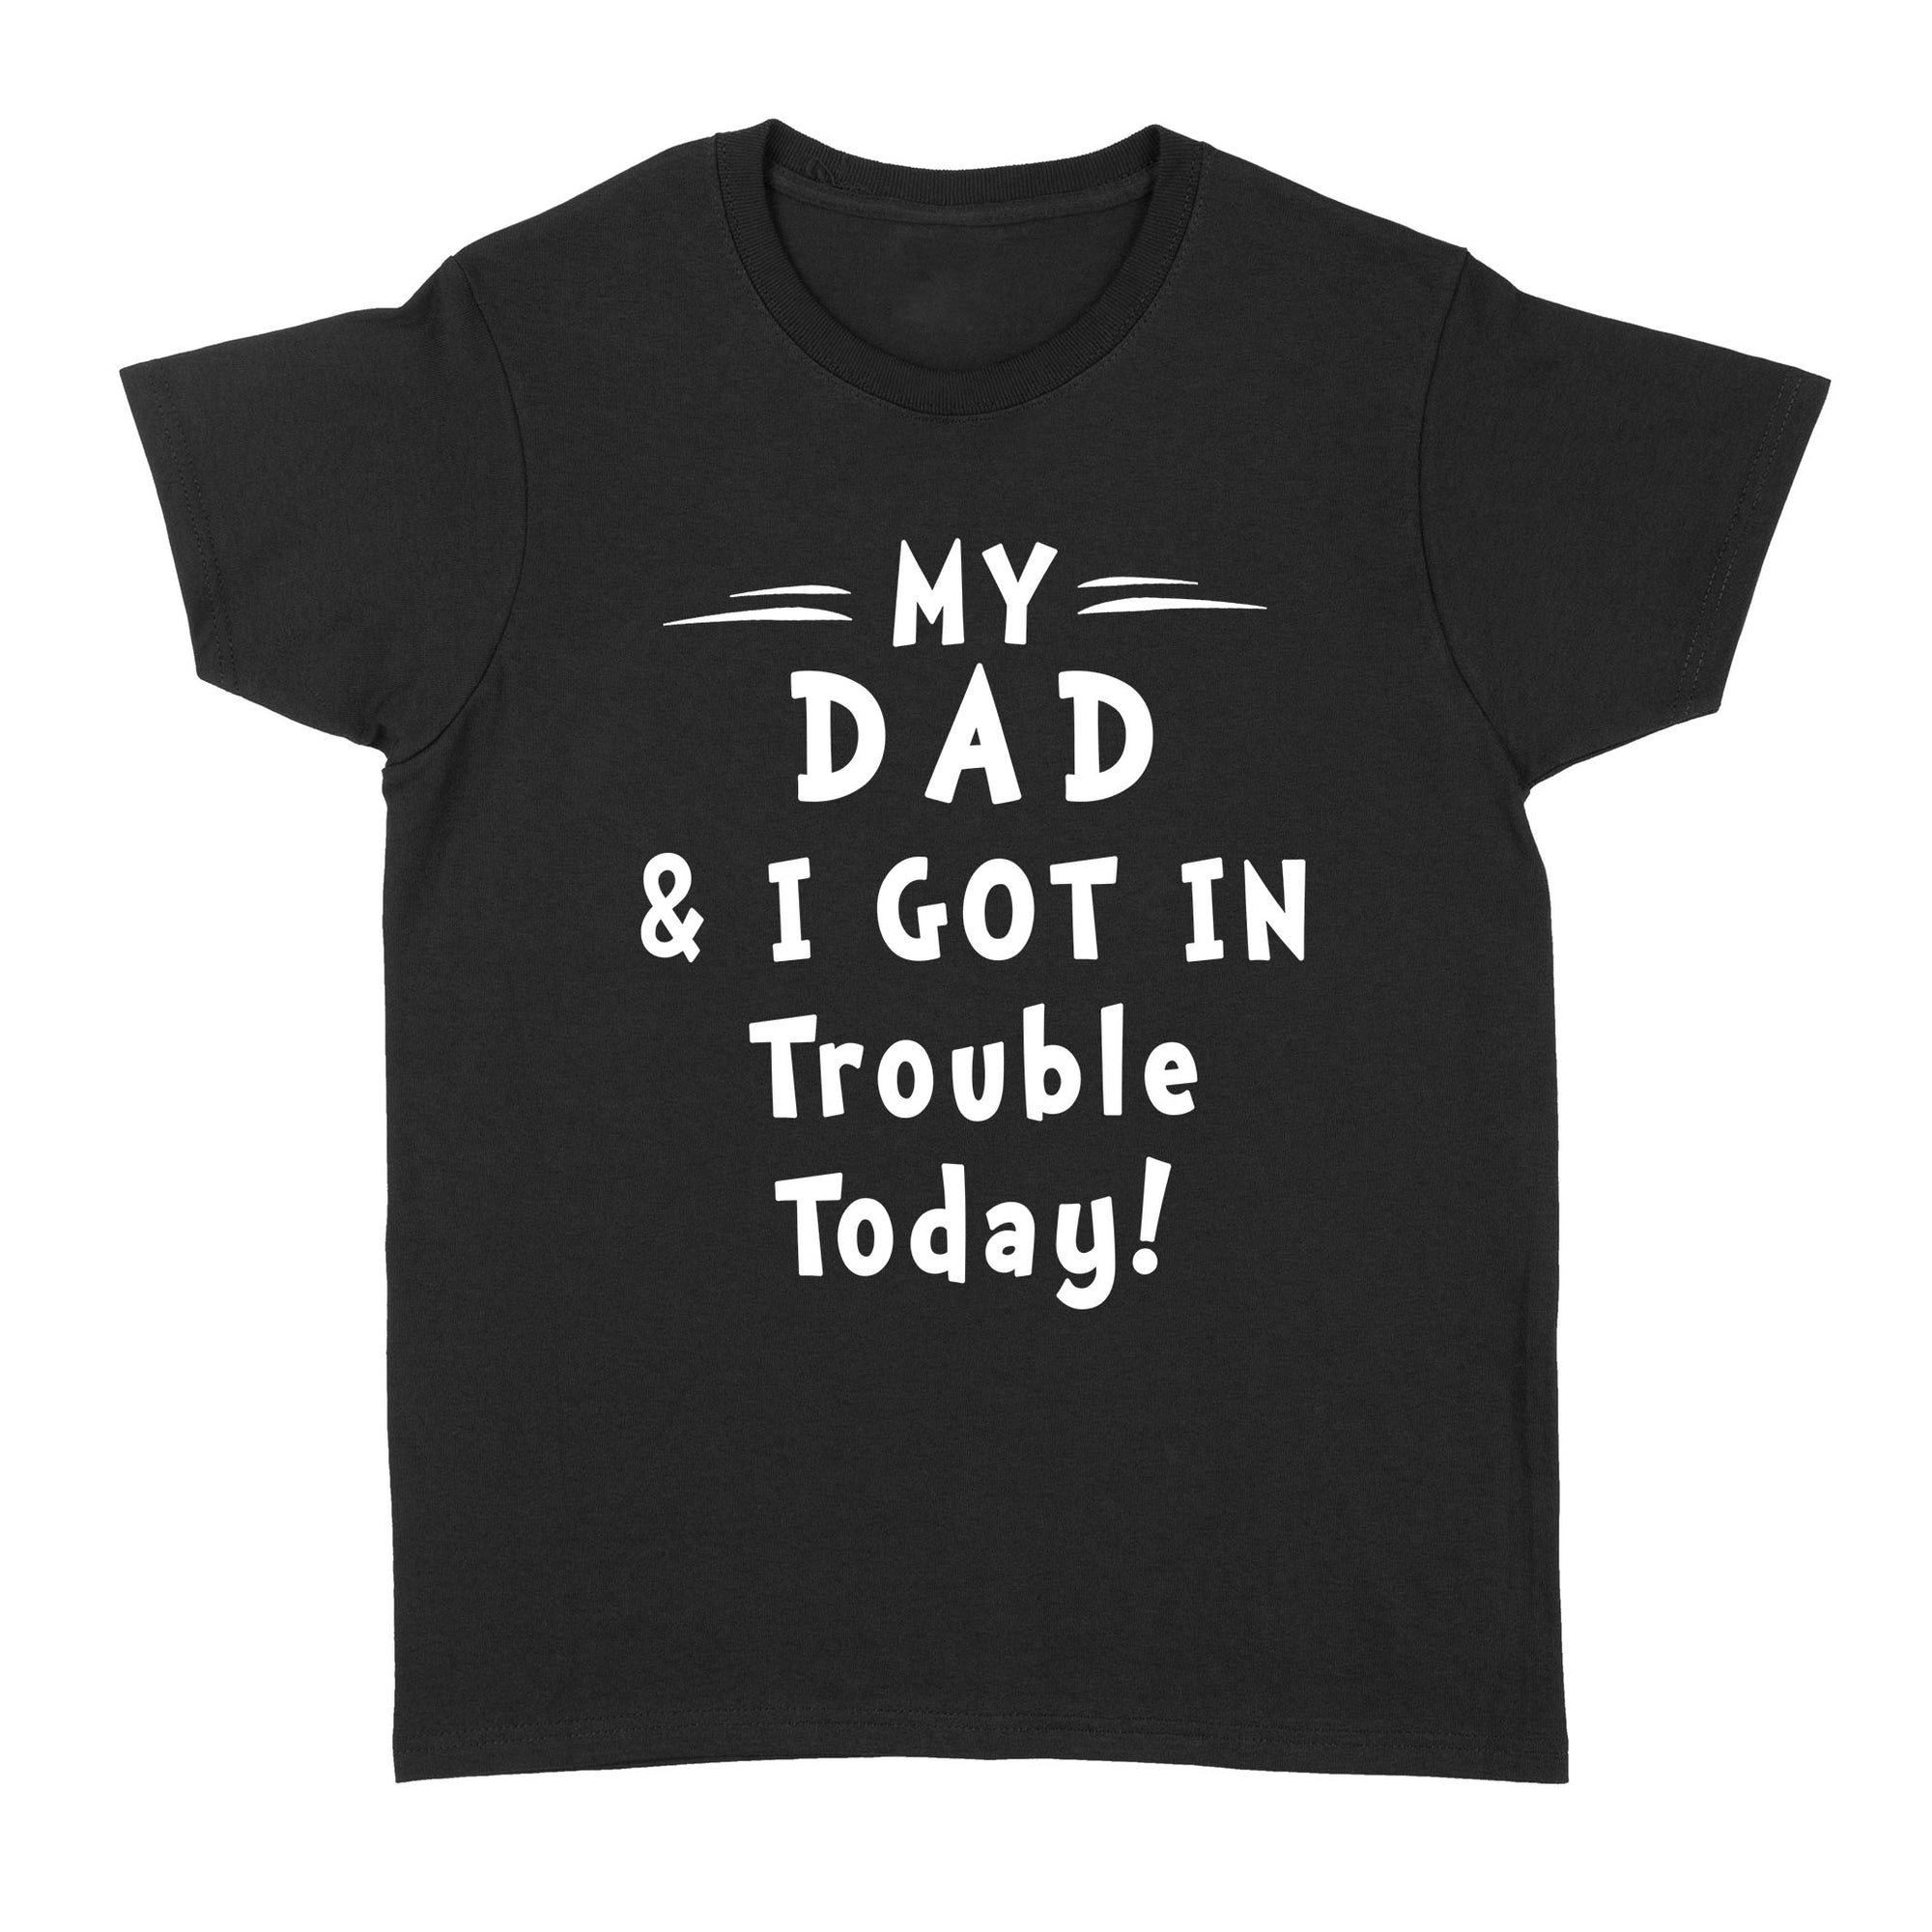 Gift Ideas for Daughter My Dad & I Got In Trouble Today B - Standard Women's T-shirt